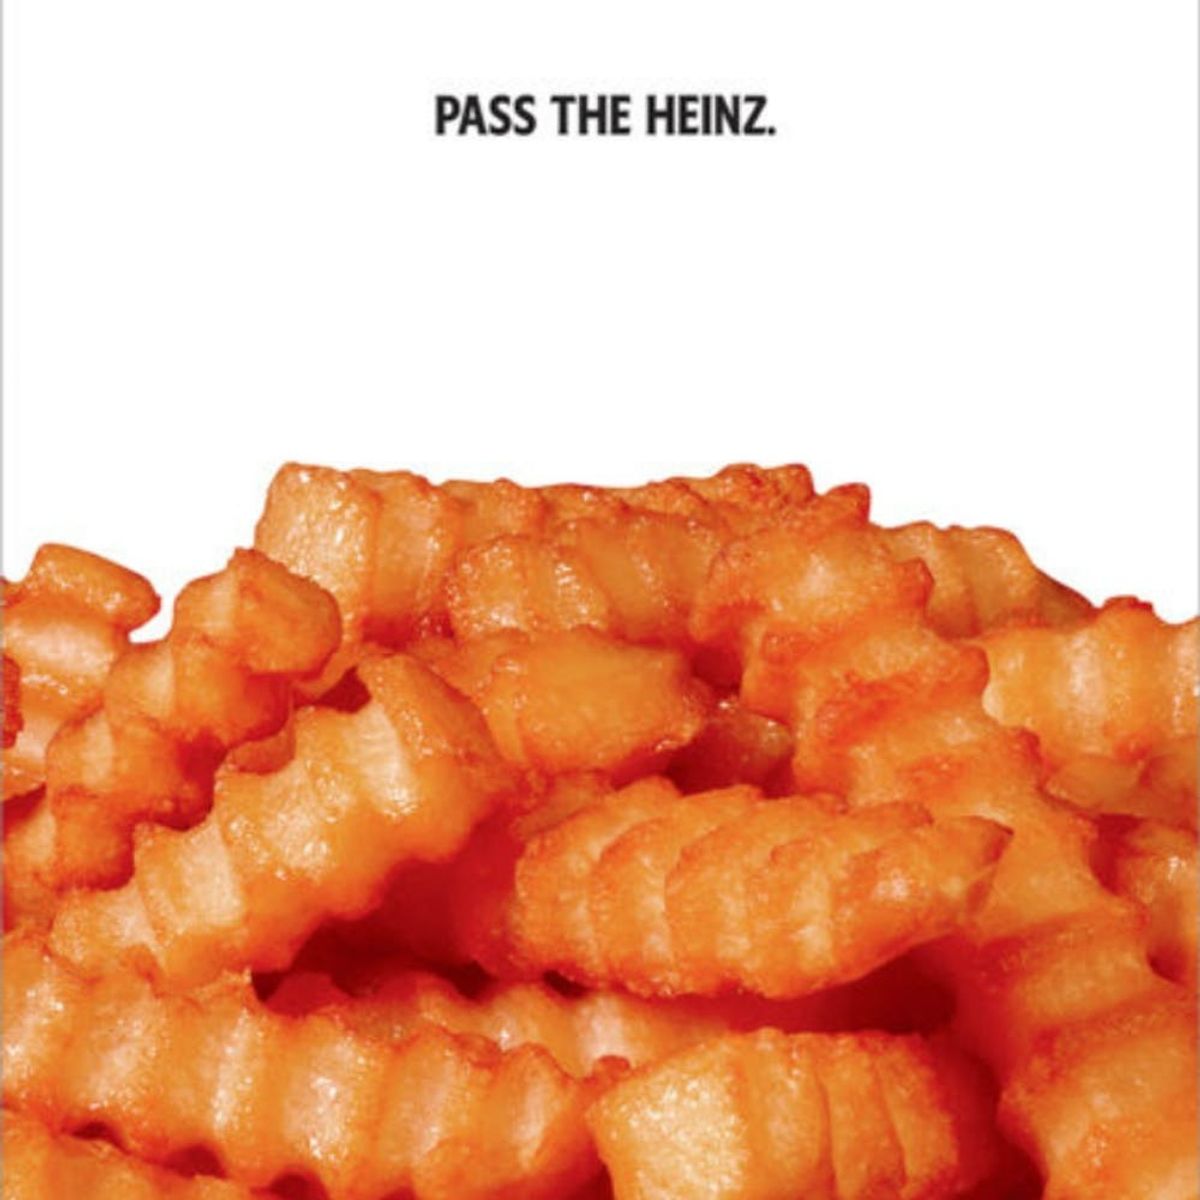 Heinz Just Ran an Ad Created by Don Draper on Mad Men